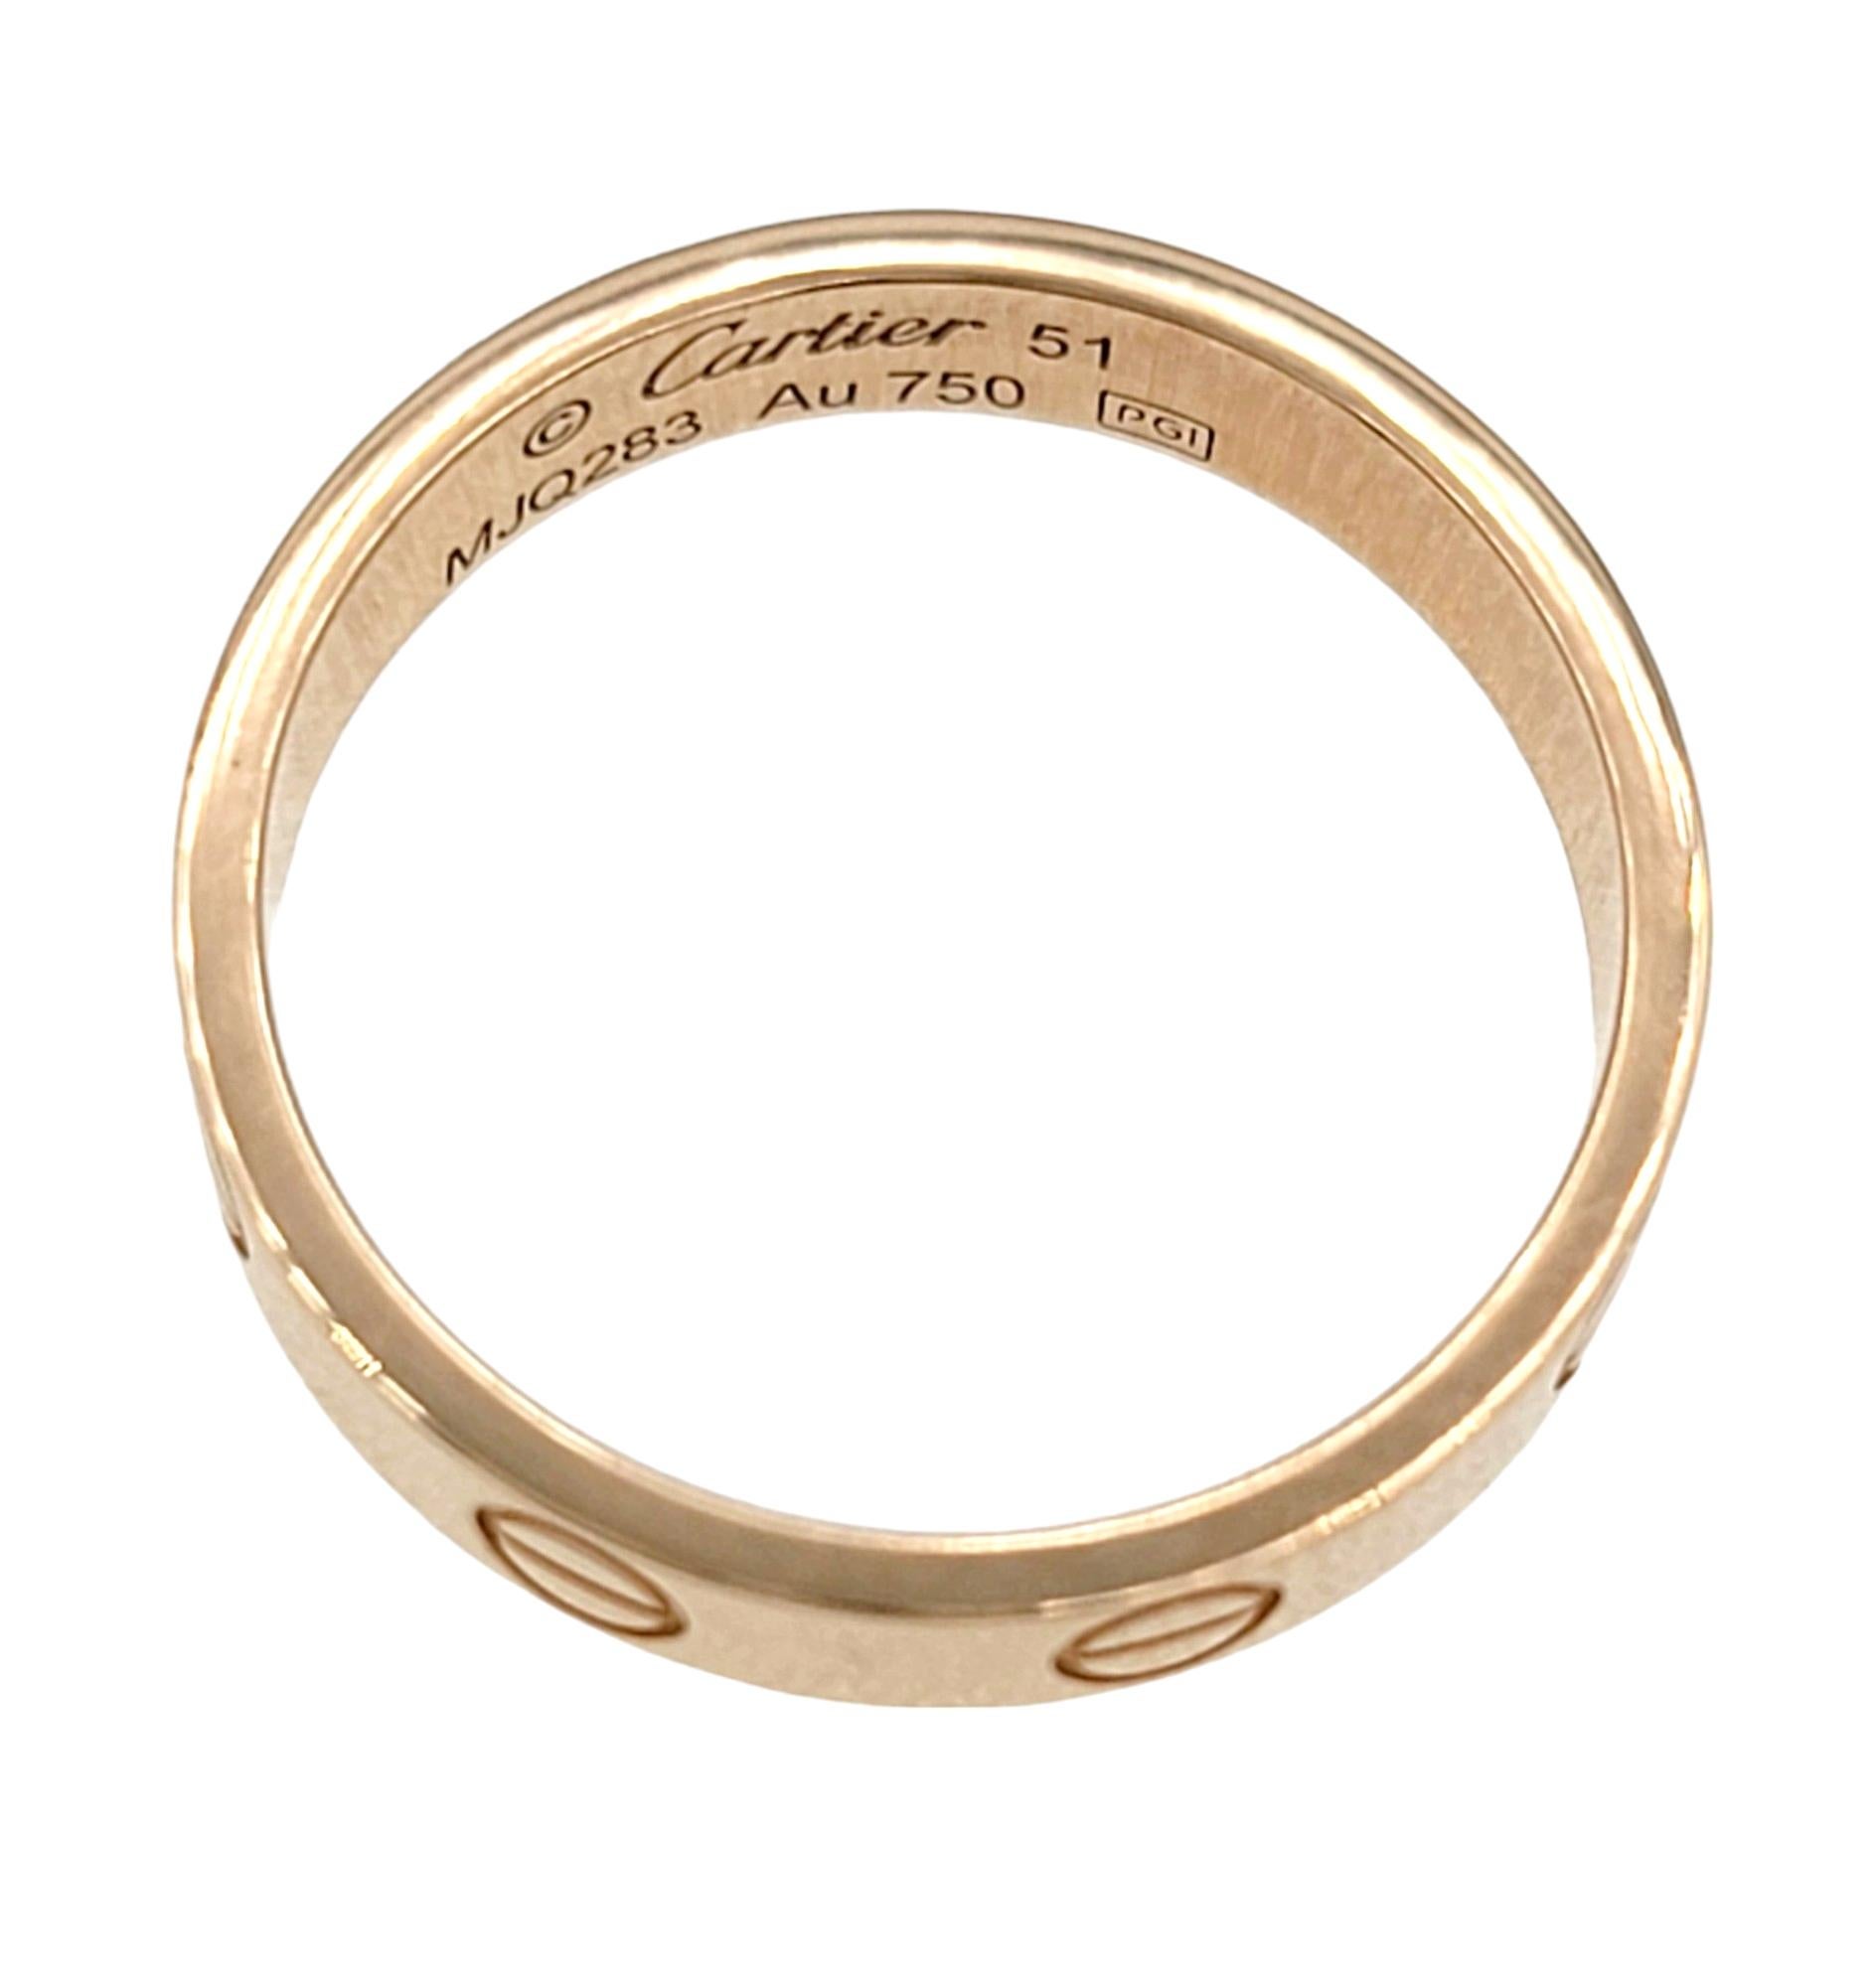 Cartier size: 51 / U.S. Ring Size: 5.75 

The Cartier Love band ring in 18 karat rose gold is a timeless and versatile piece that seamlessly transitions between casual and formal occasions. The distinctive design of the Love collection, with its